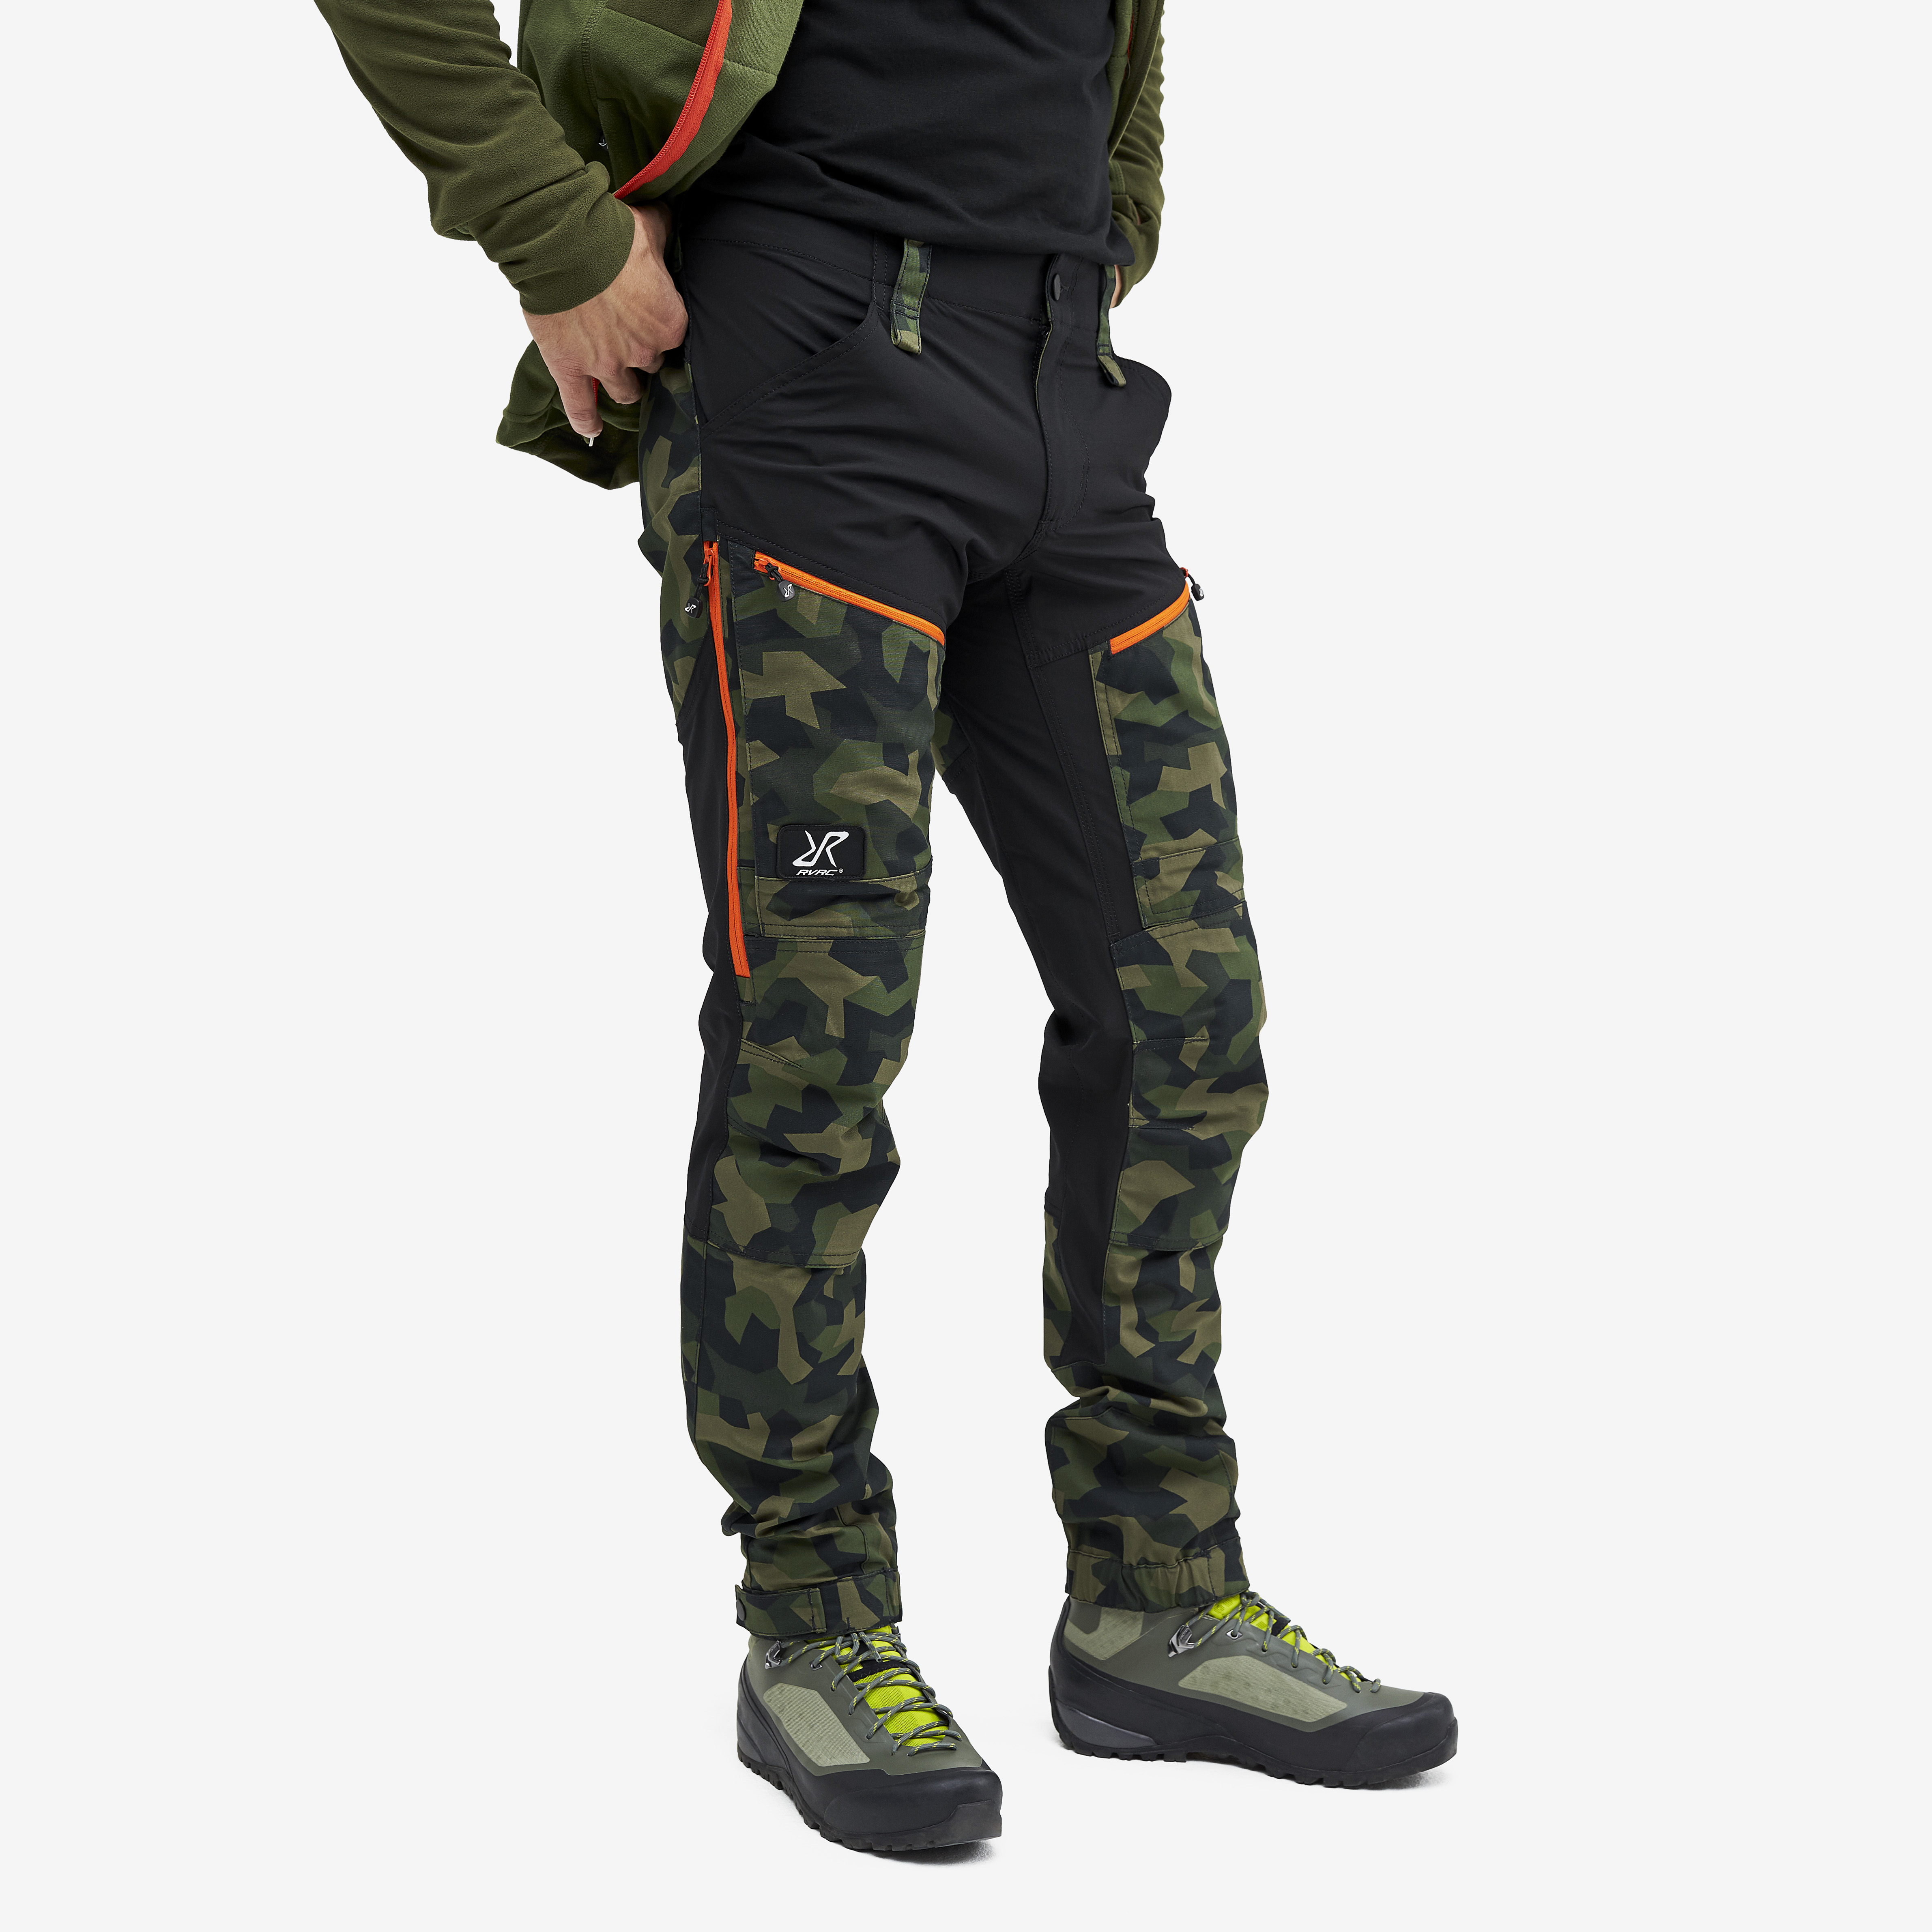 RVRC GP Pro hiking trousers for men in green